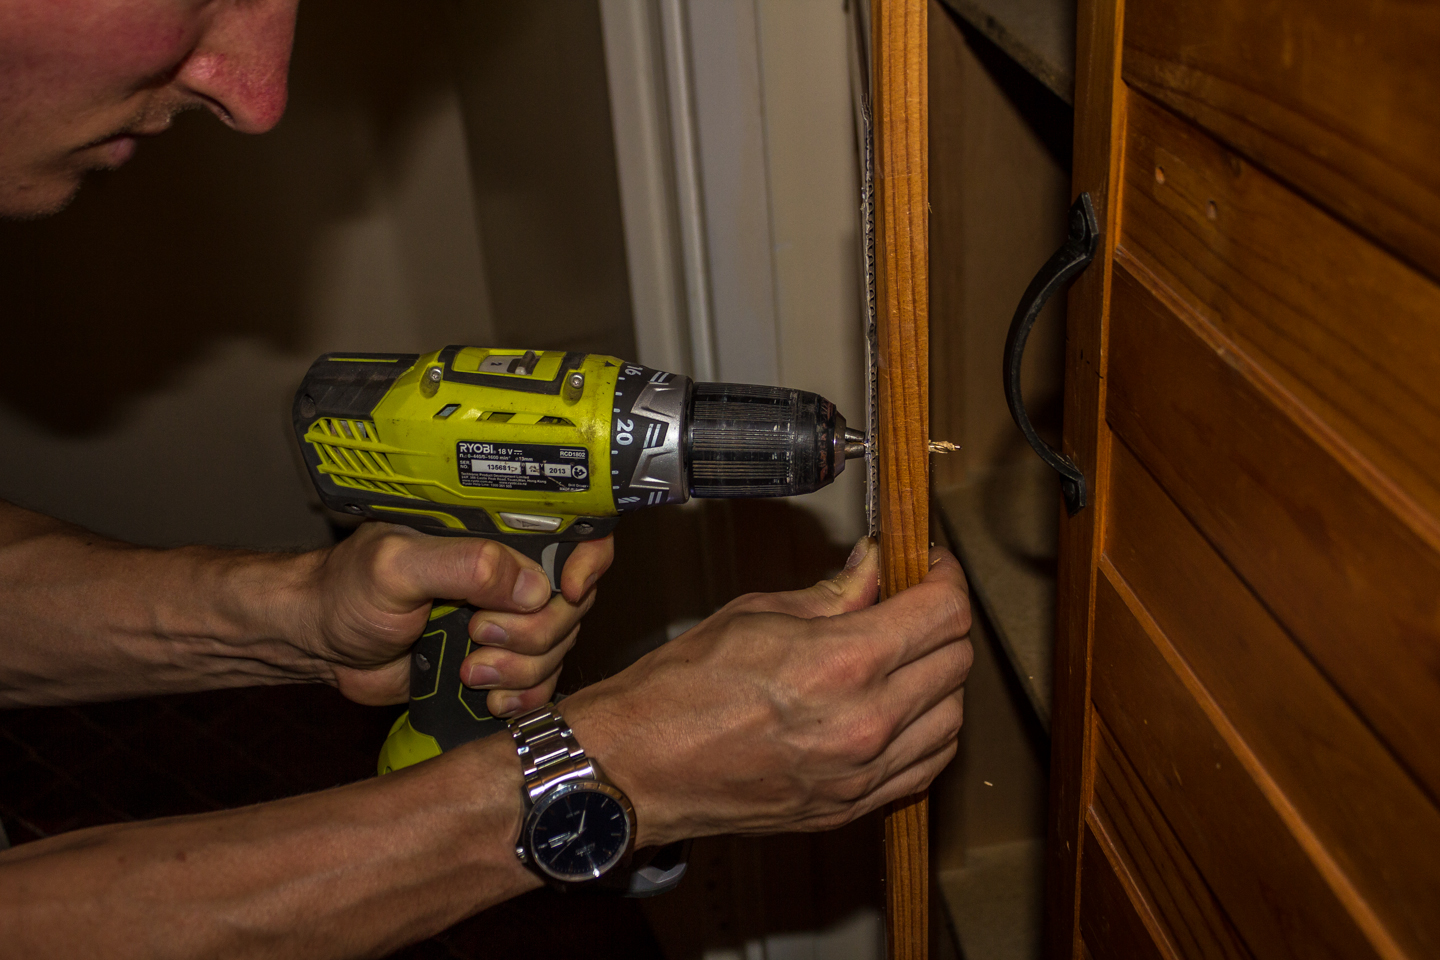 30/12/15 Day 5 [Only time we had available] Hubby drilling a hole in the door using the template